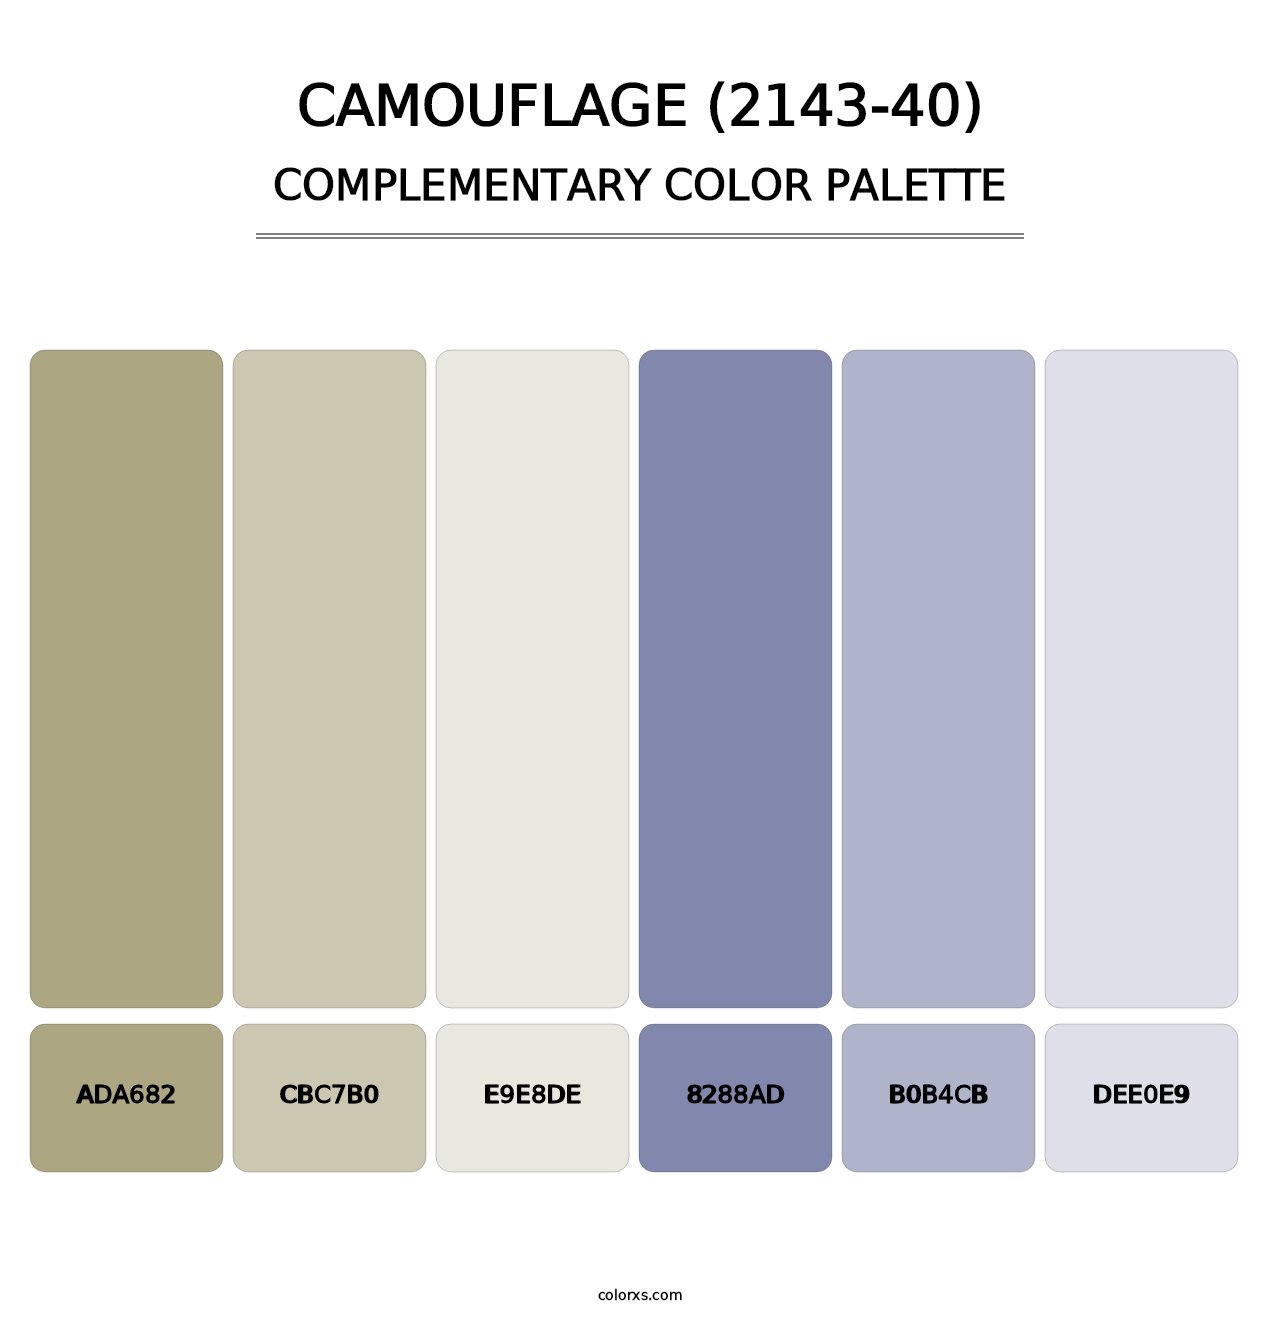 Camouflage (2143-40) - Complementary Color Palette